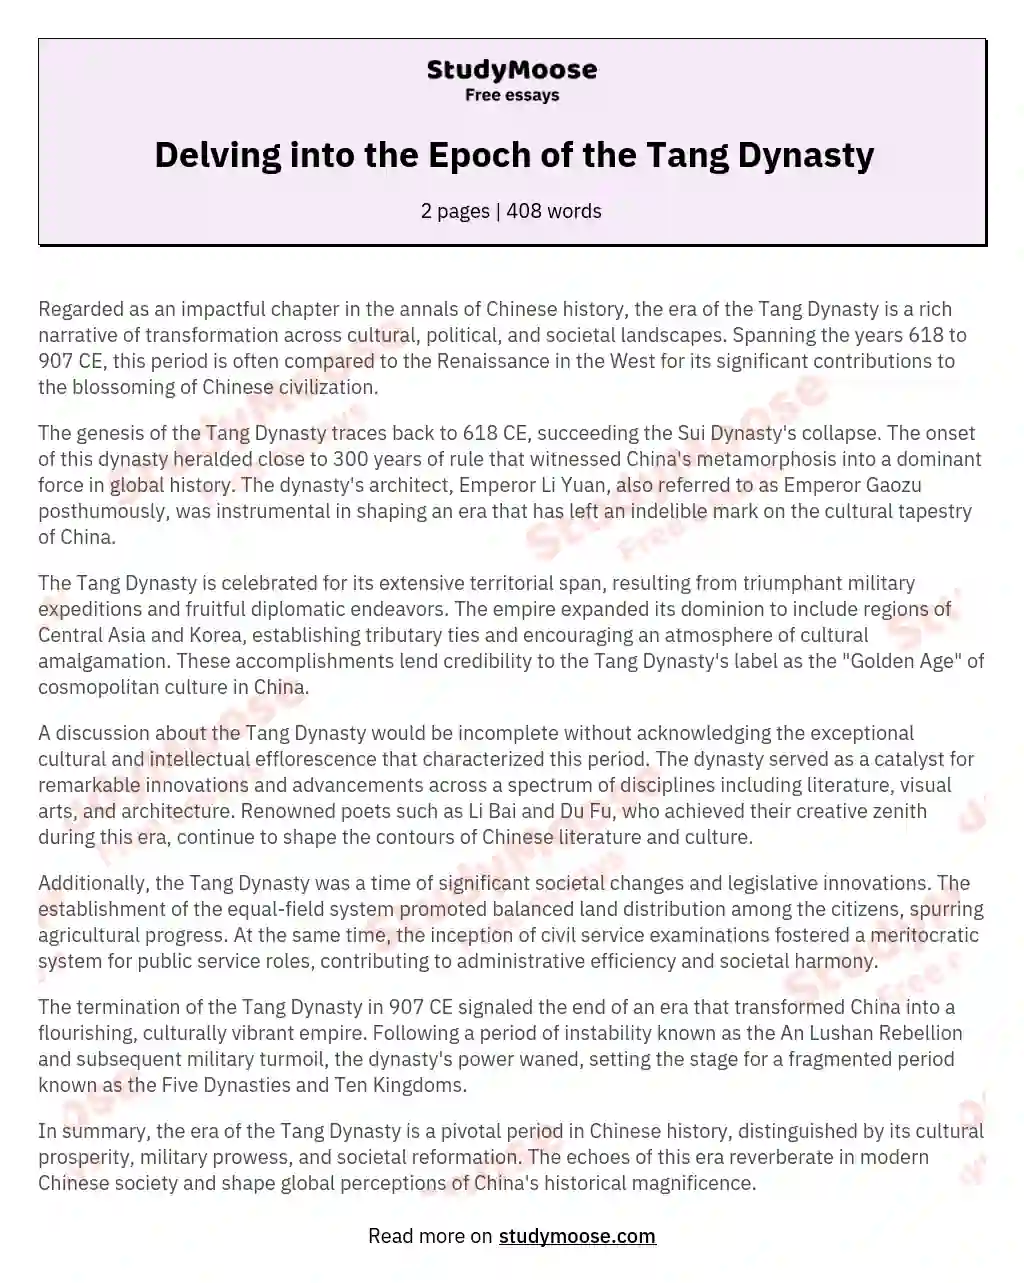 Delving into the Epoch of the Tang Dynasty essay